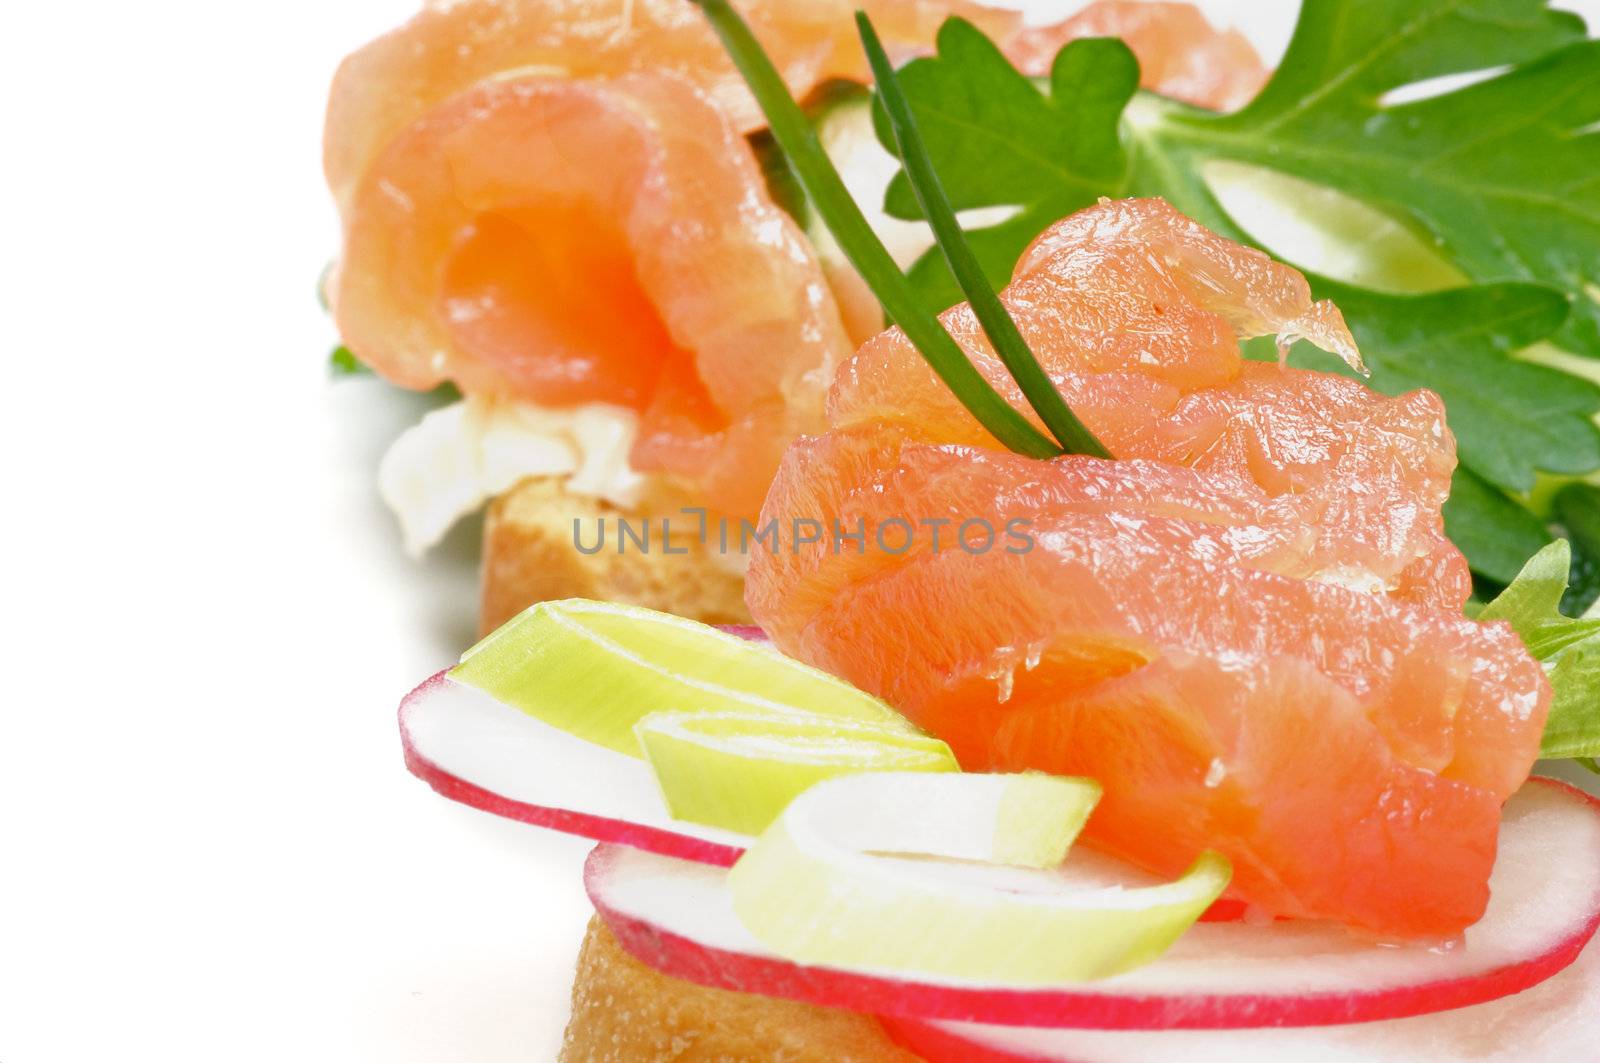 Snack of Smoked Salmon with Radish and Greens close up on white background